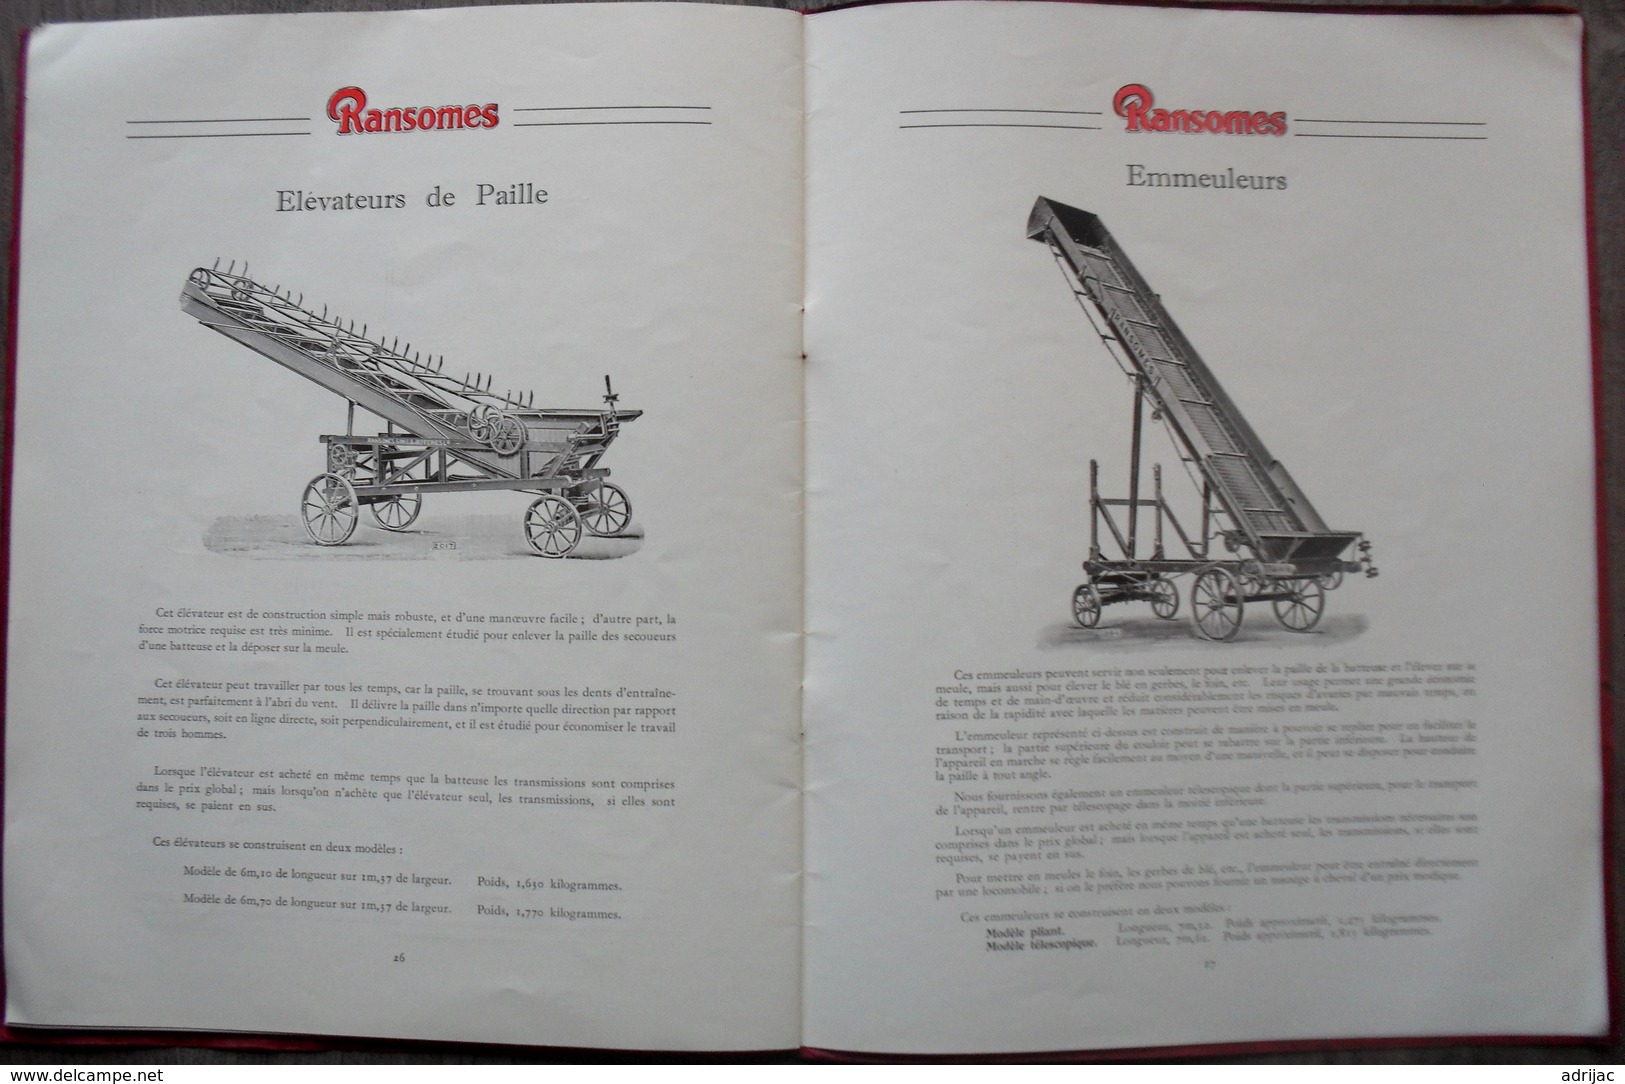 Catalogue 28  pages Ransomes Batteuses modeles normaux Ransomes,Sims & Jefferies,Ltd Ipswich Angleterre